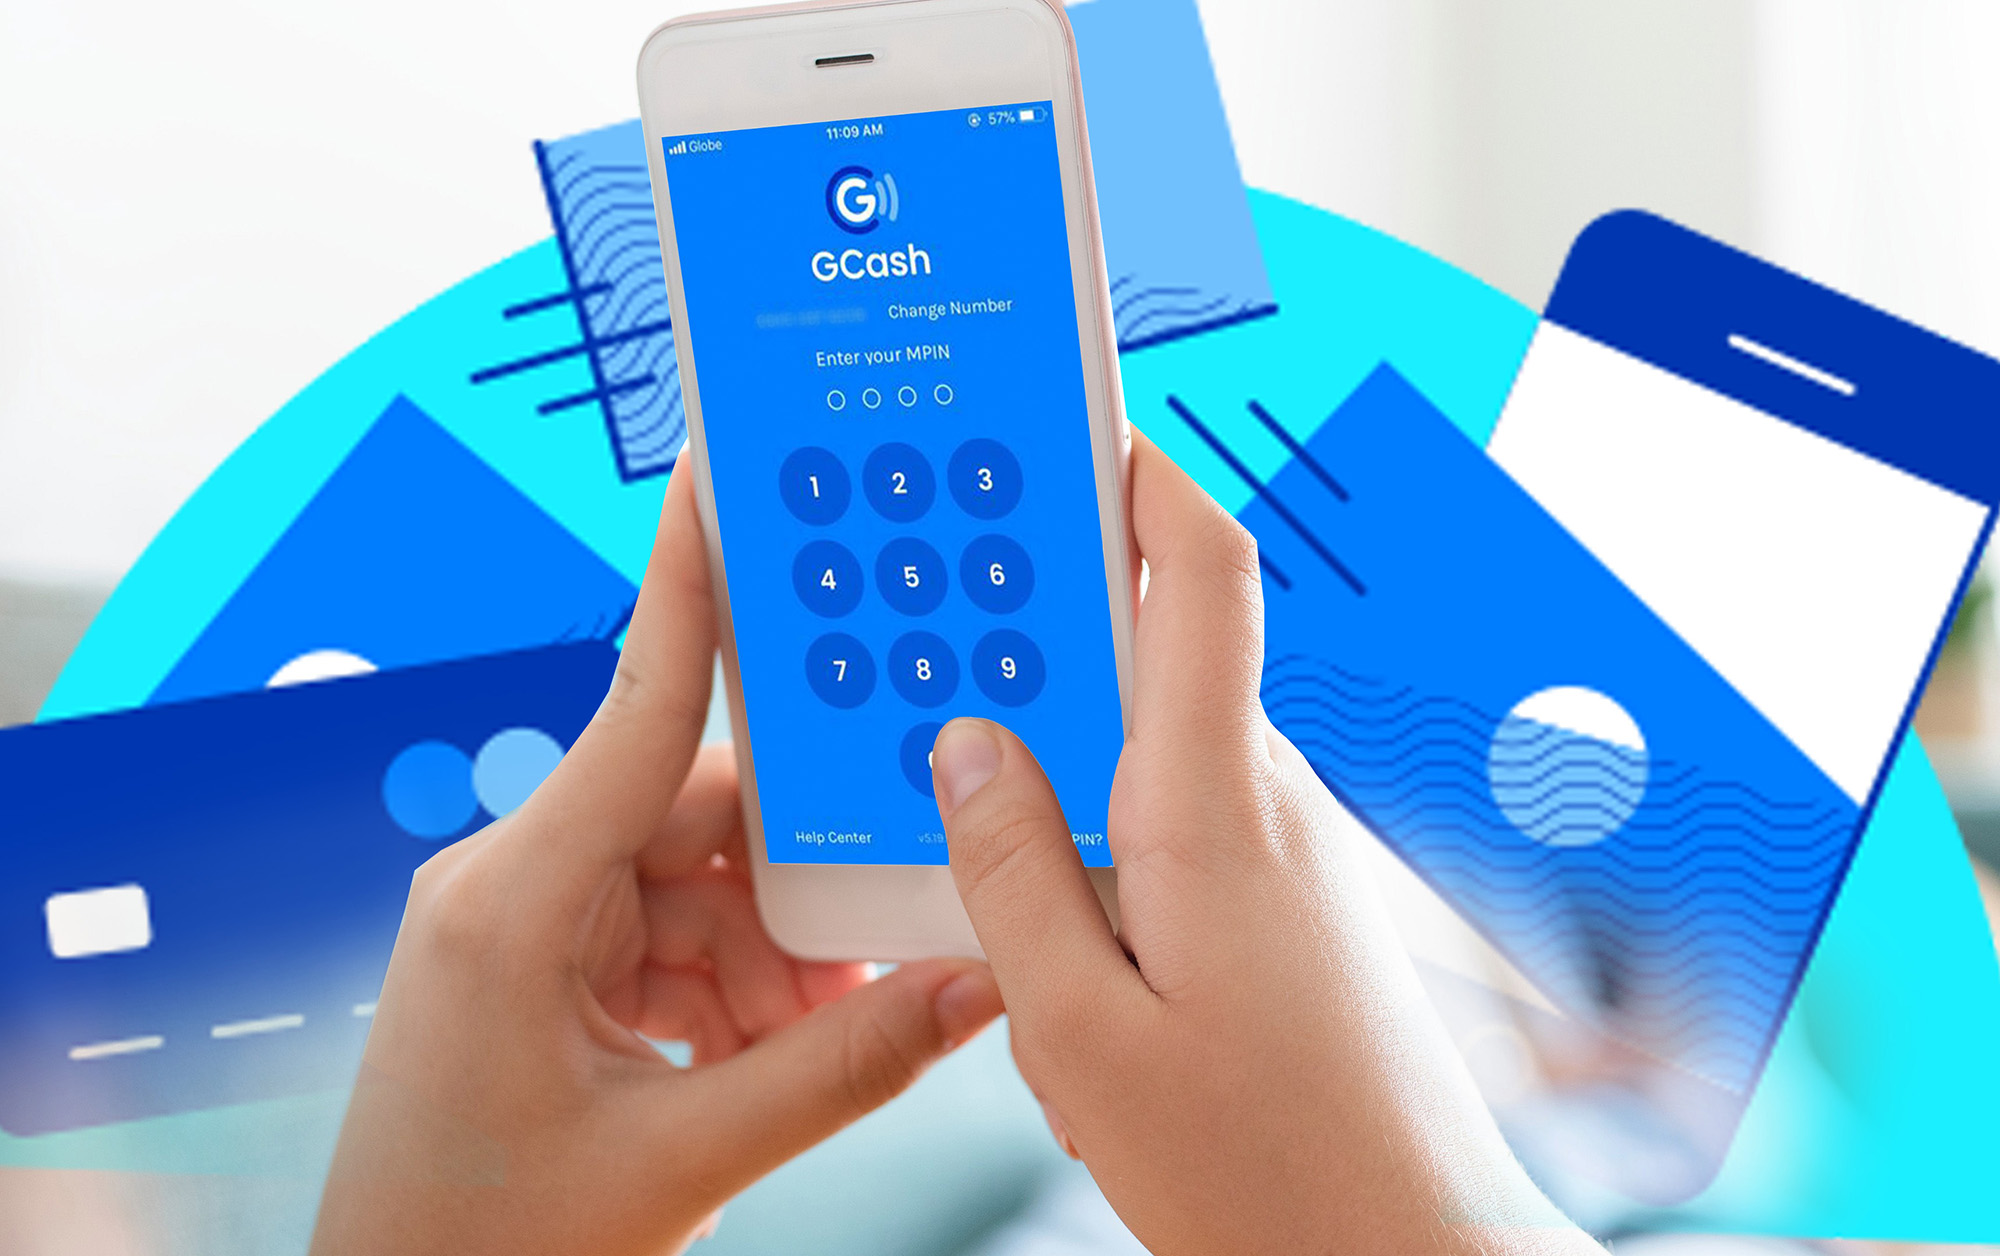 GCash cash-in now charges 2.58% convenience fee from MasterCard/VISA bank card payments